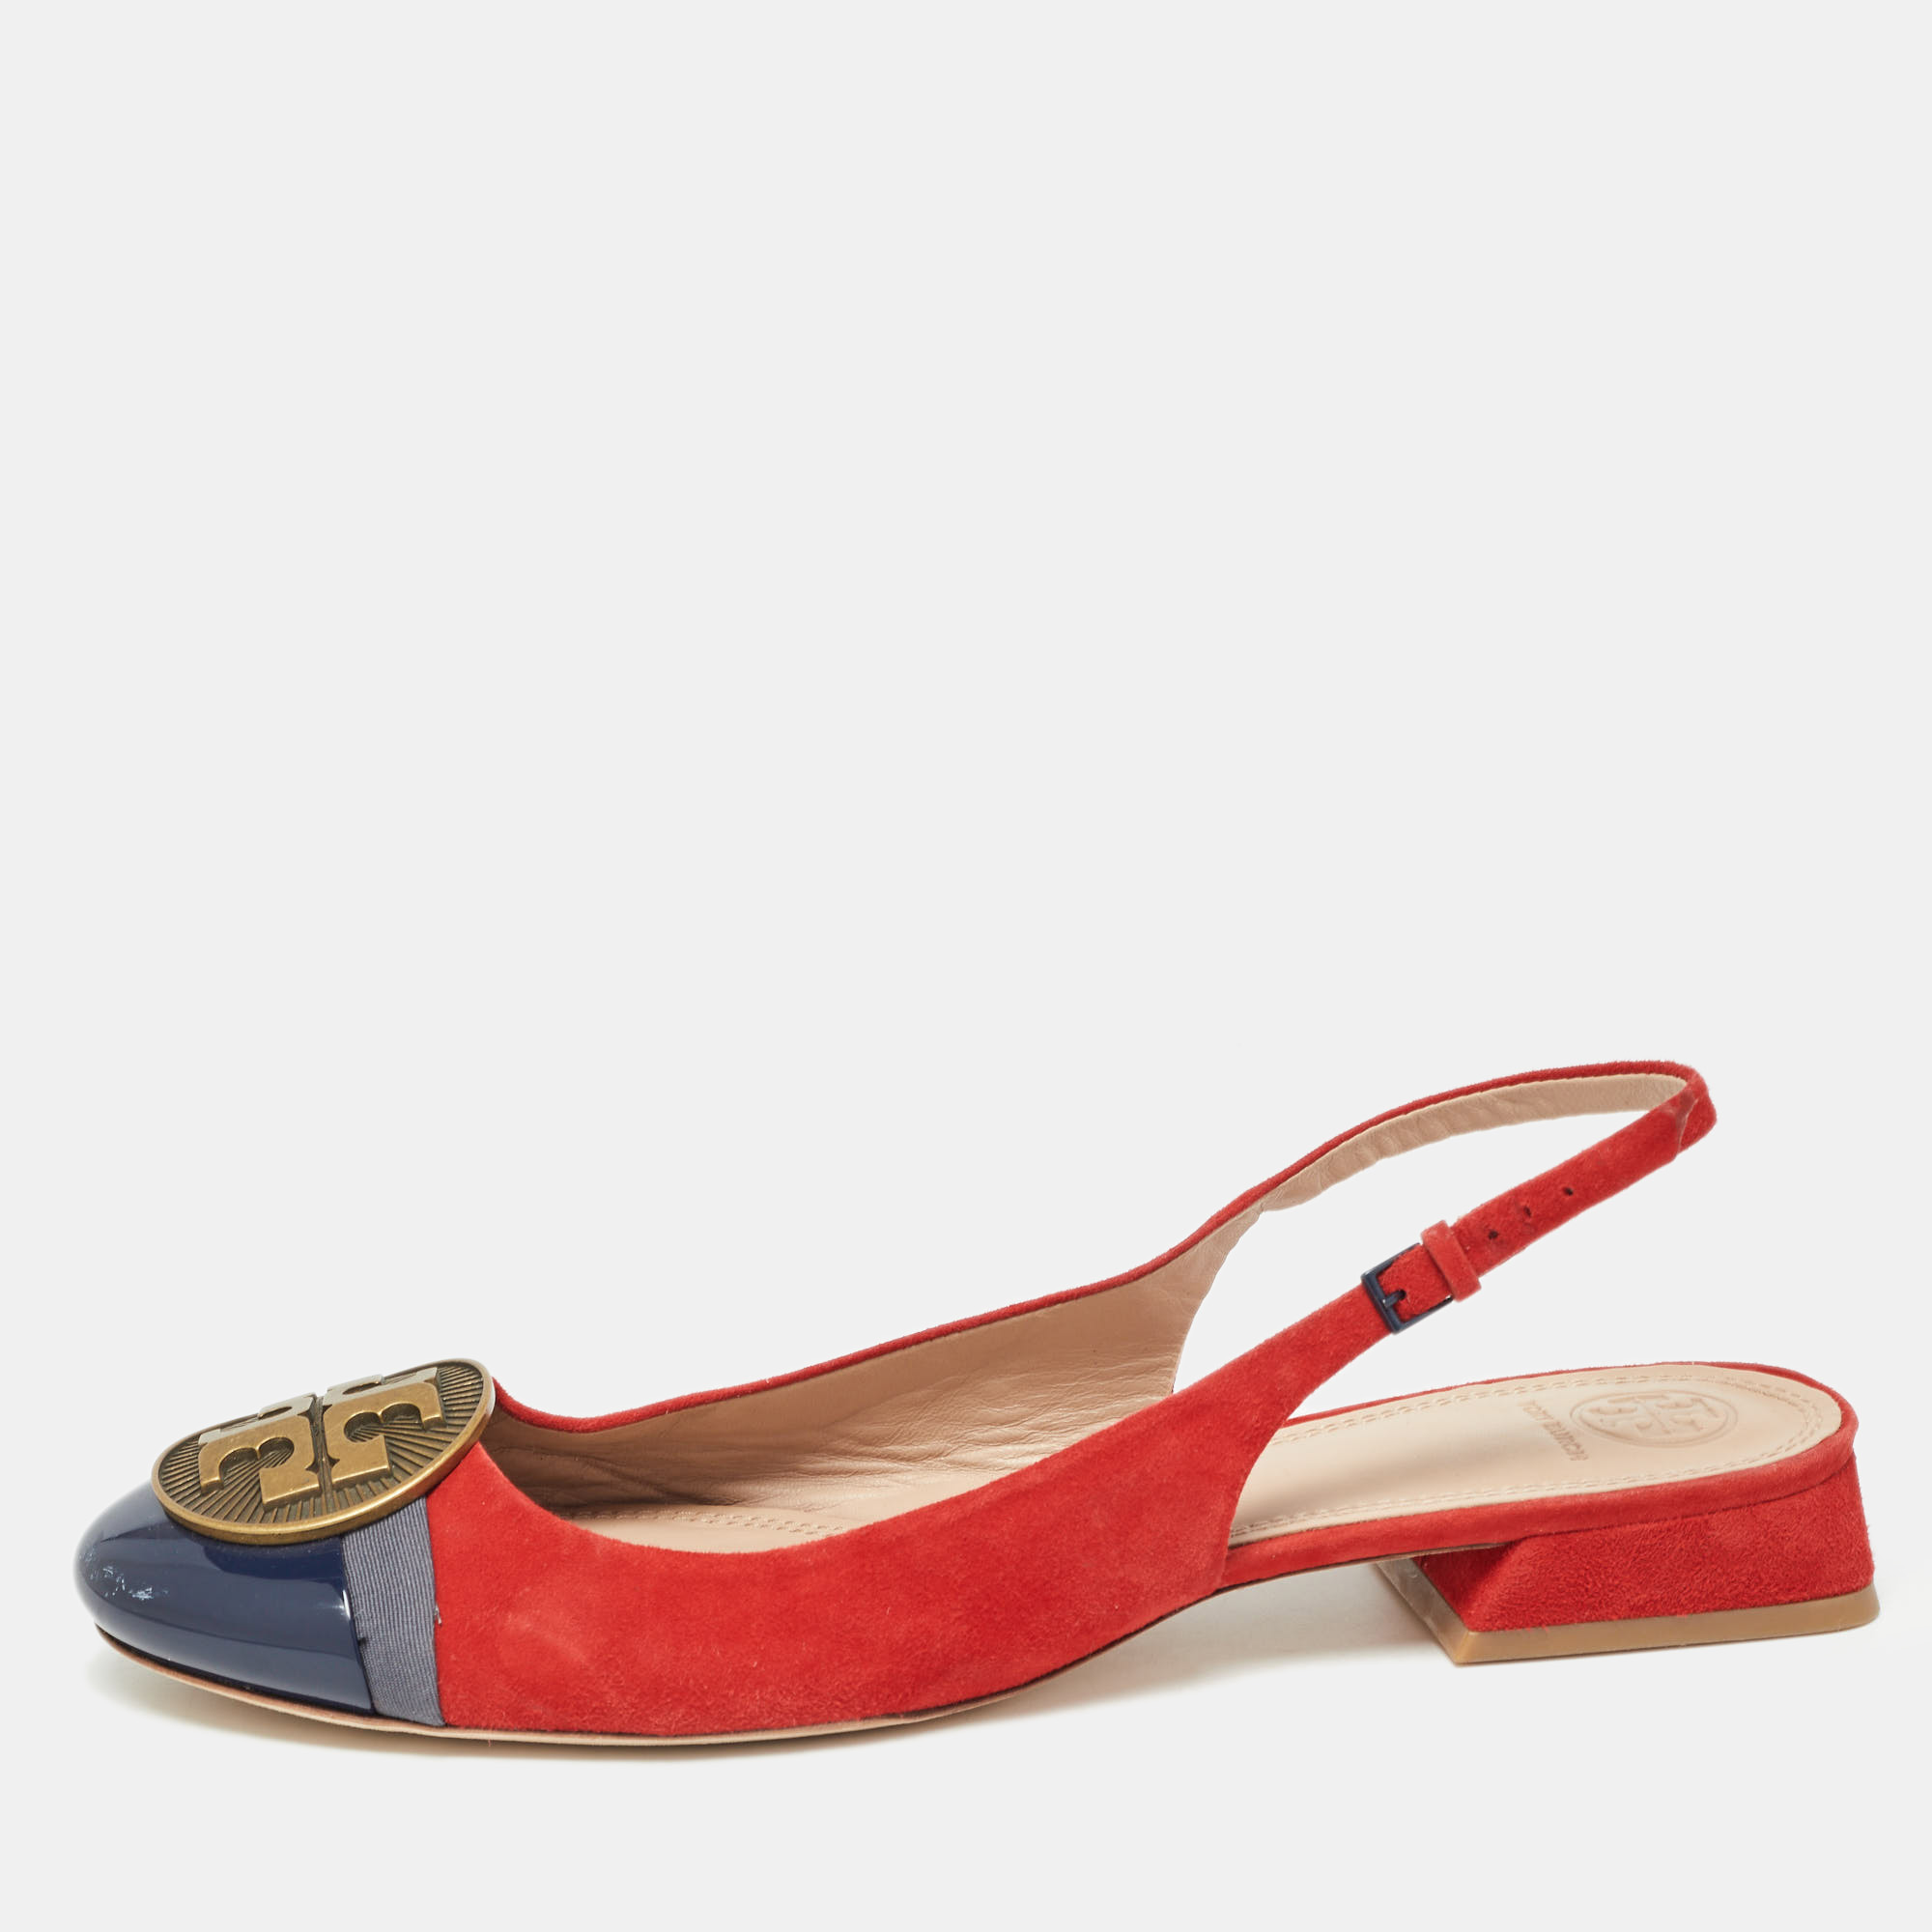 

Tory Burch Red/Blue Suede and Patent Leather Slingback Flat Sandals Size 40